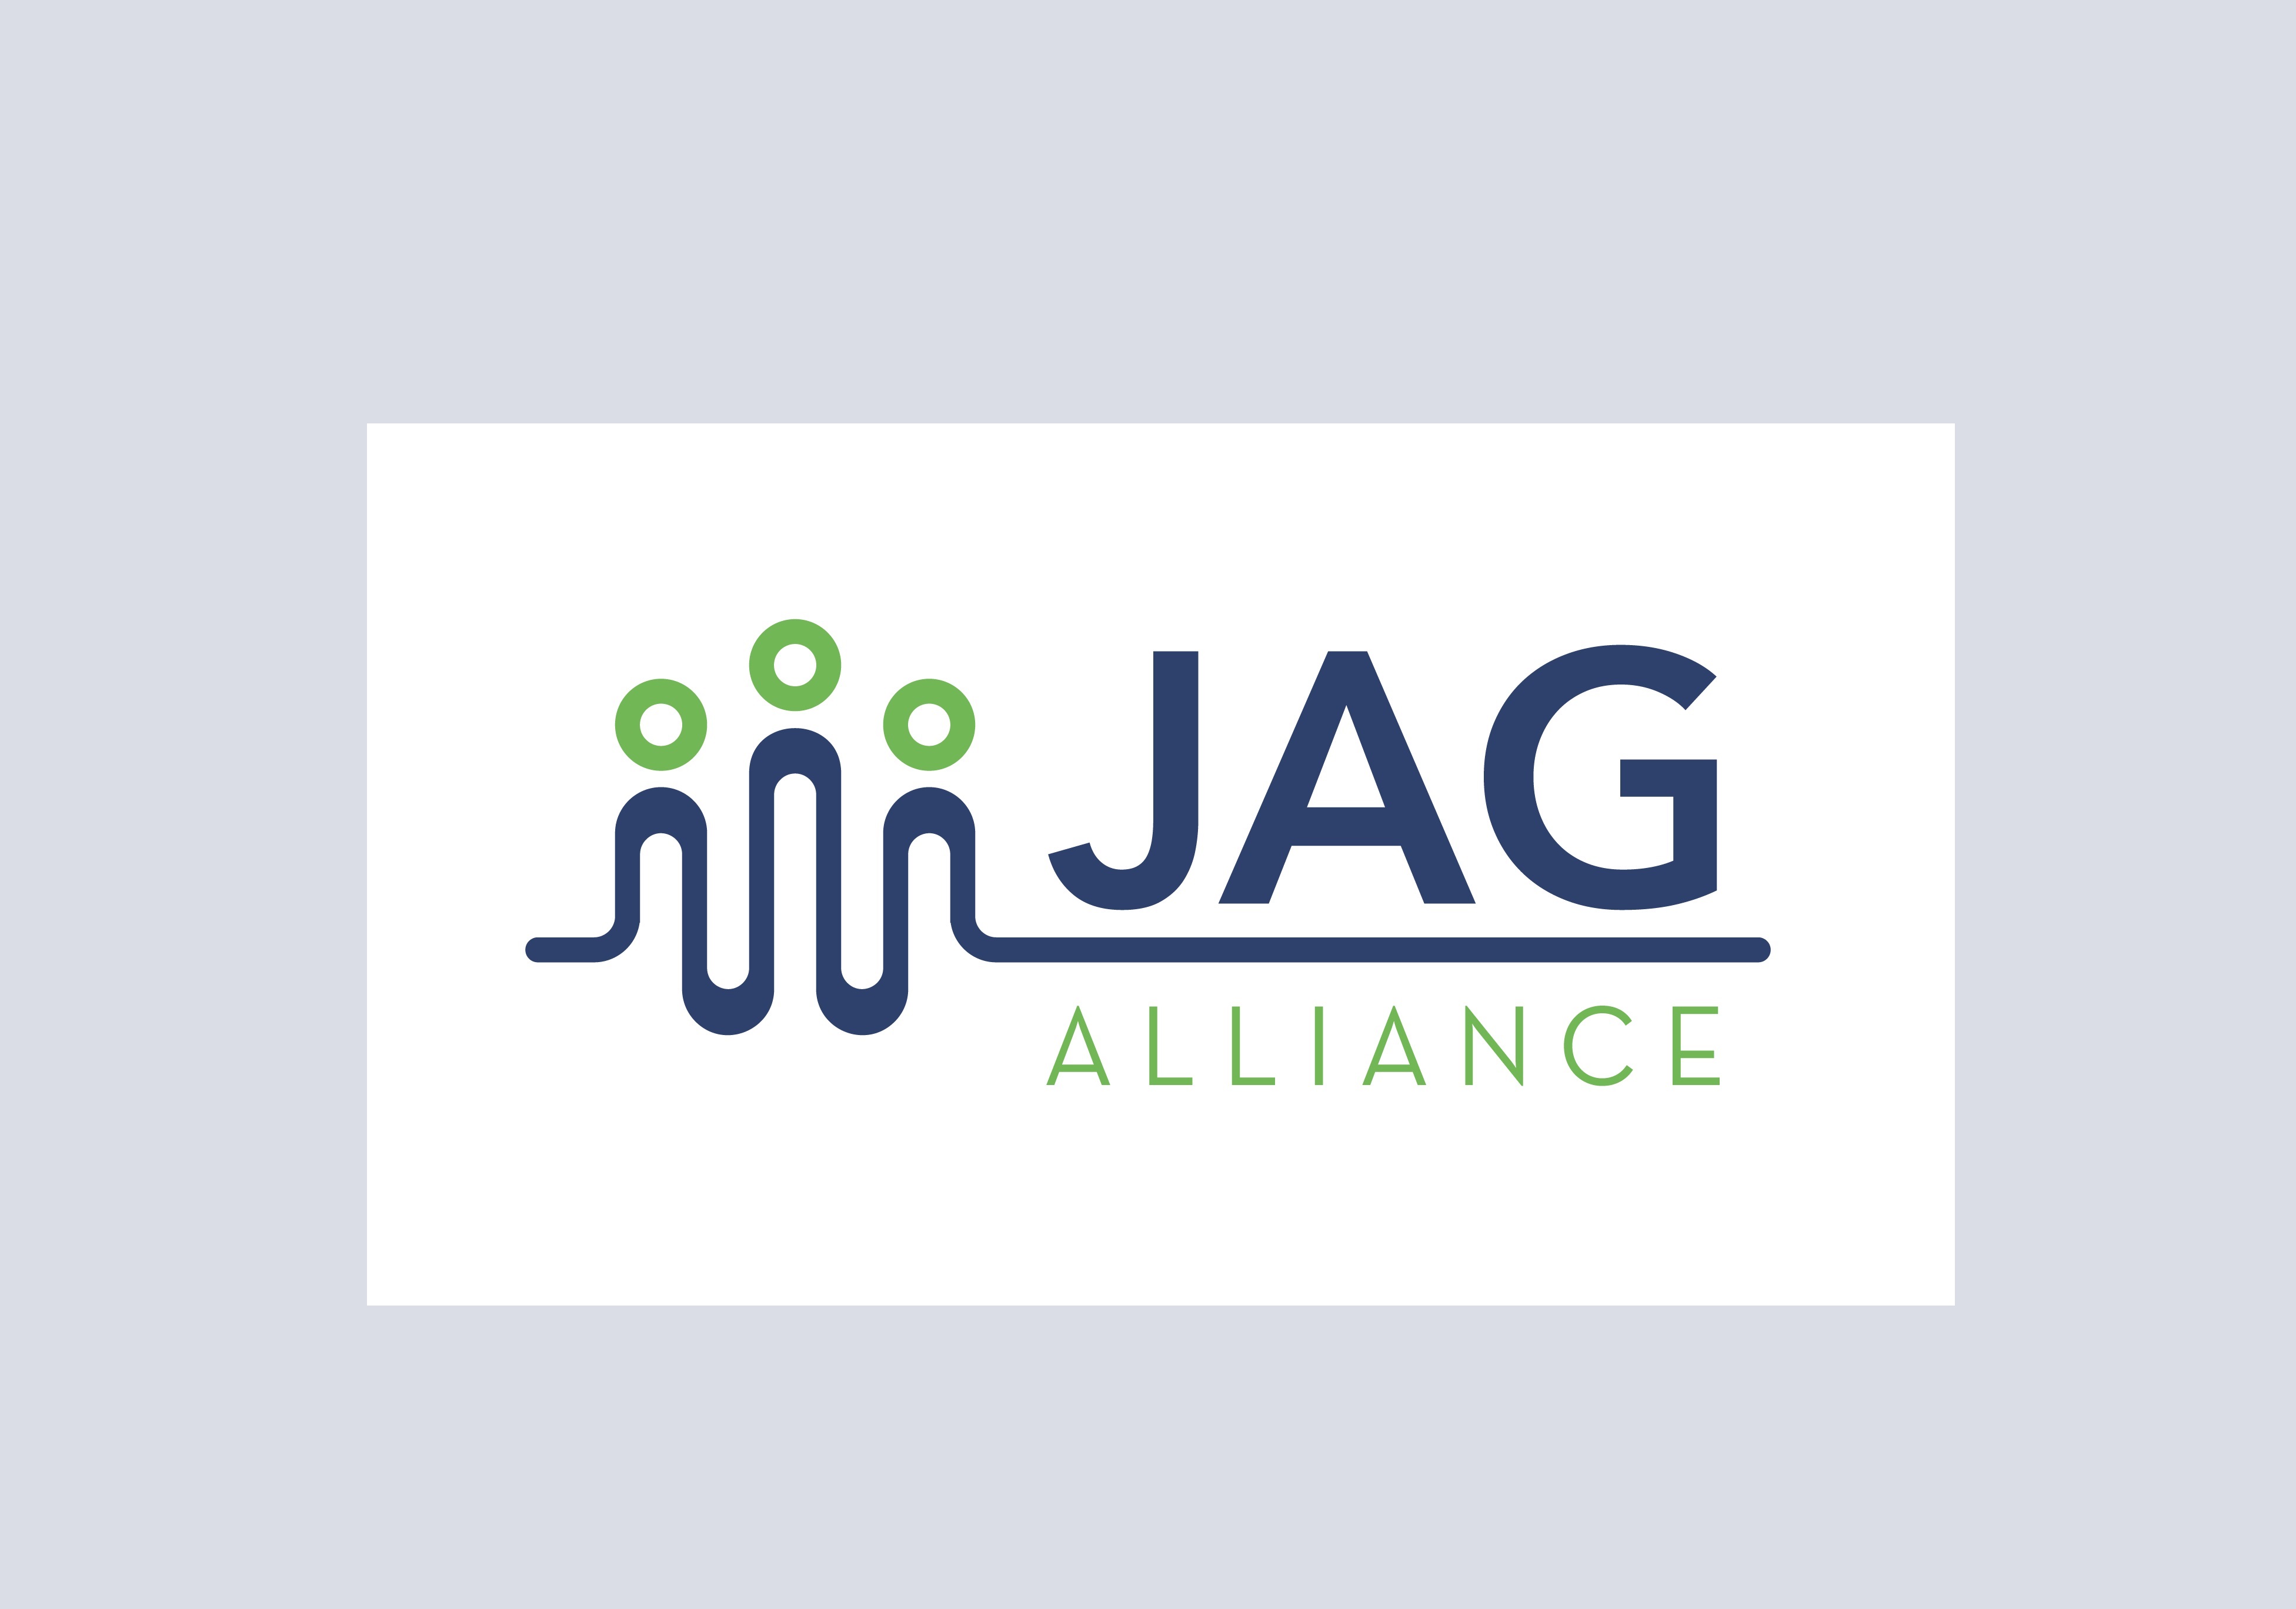 JAG Alliance Announces Expansion in Miami and Tampa With a New Range of Innovative Health & Wellness Products